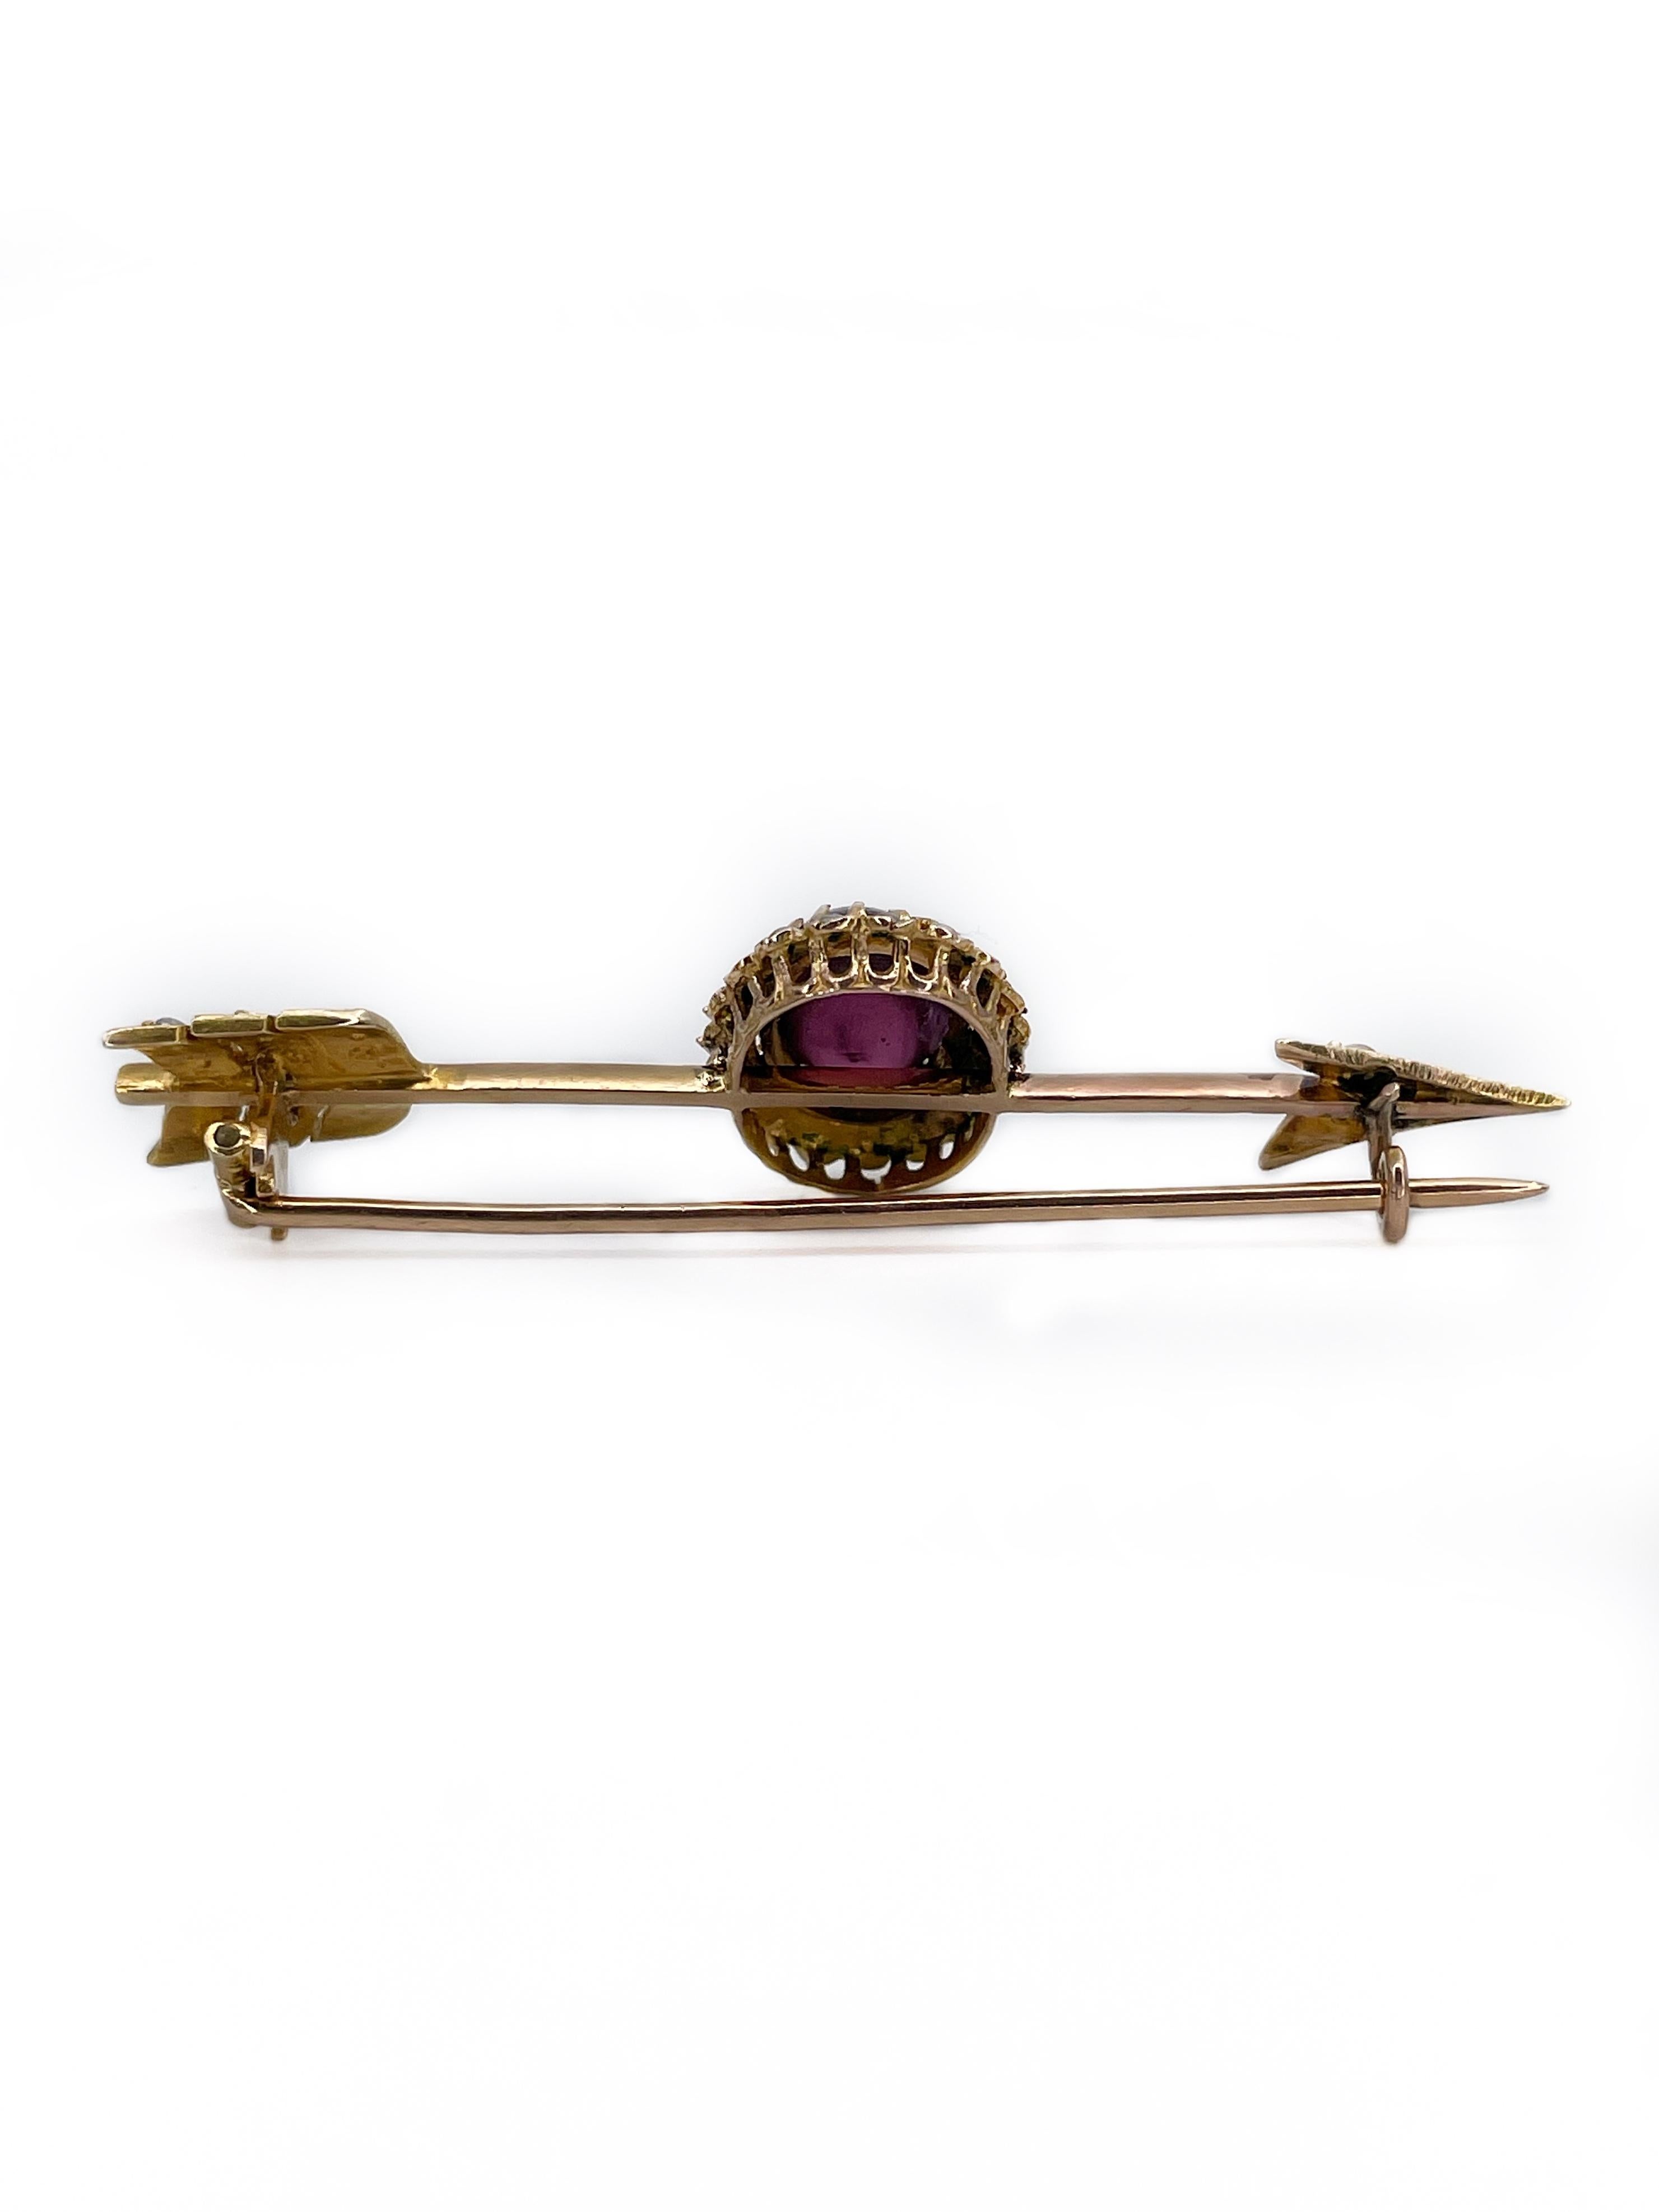 This is a magnificent Victorian arrow bar brooch crafted in 14K gold. The piece features beautiful oval cabochon cut garnet (1.80ct, RP-PR 6/4, P1). It accompanied with 35 seed pearls (1.3-1.4mm). 

Weight: 3.74g
Length: 5cm
Central detail: